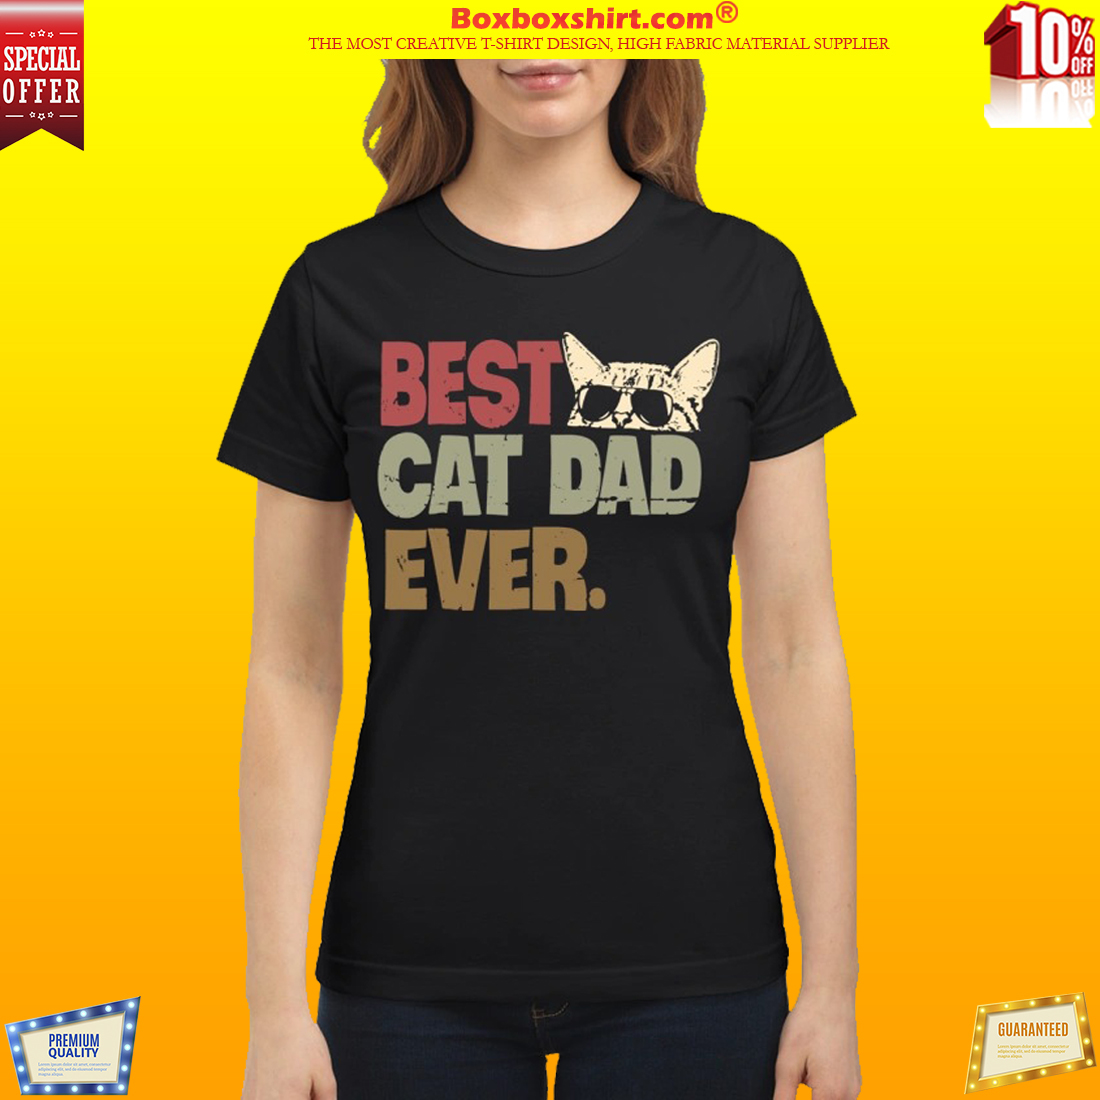 Best cat dad ever classic shirt and sweatshirt